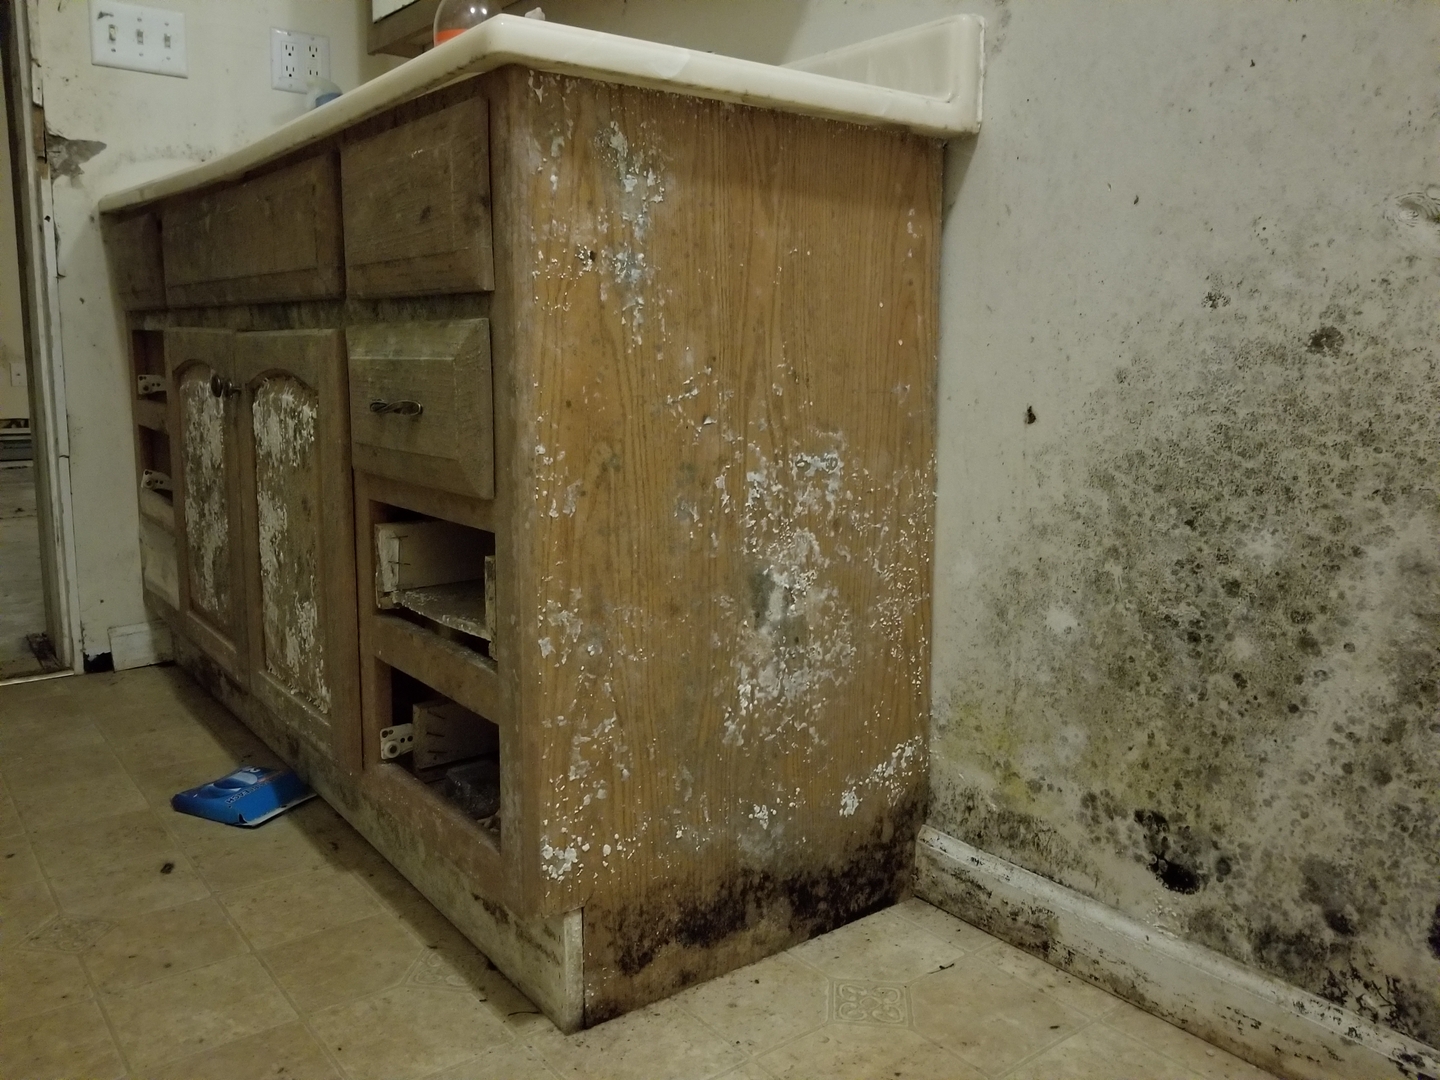 Mold on cabinets and walls